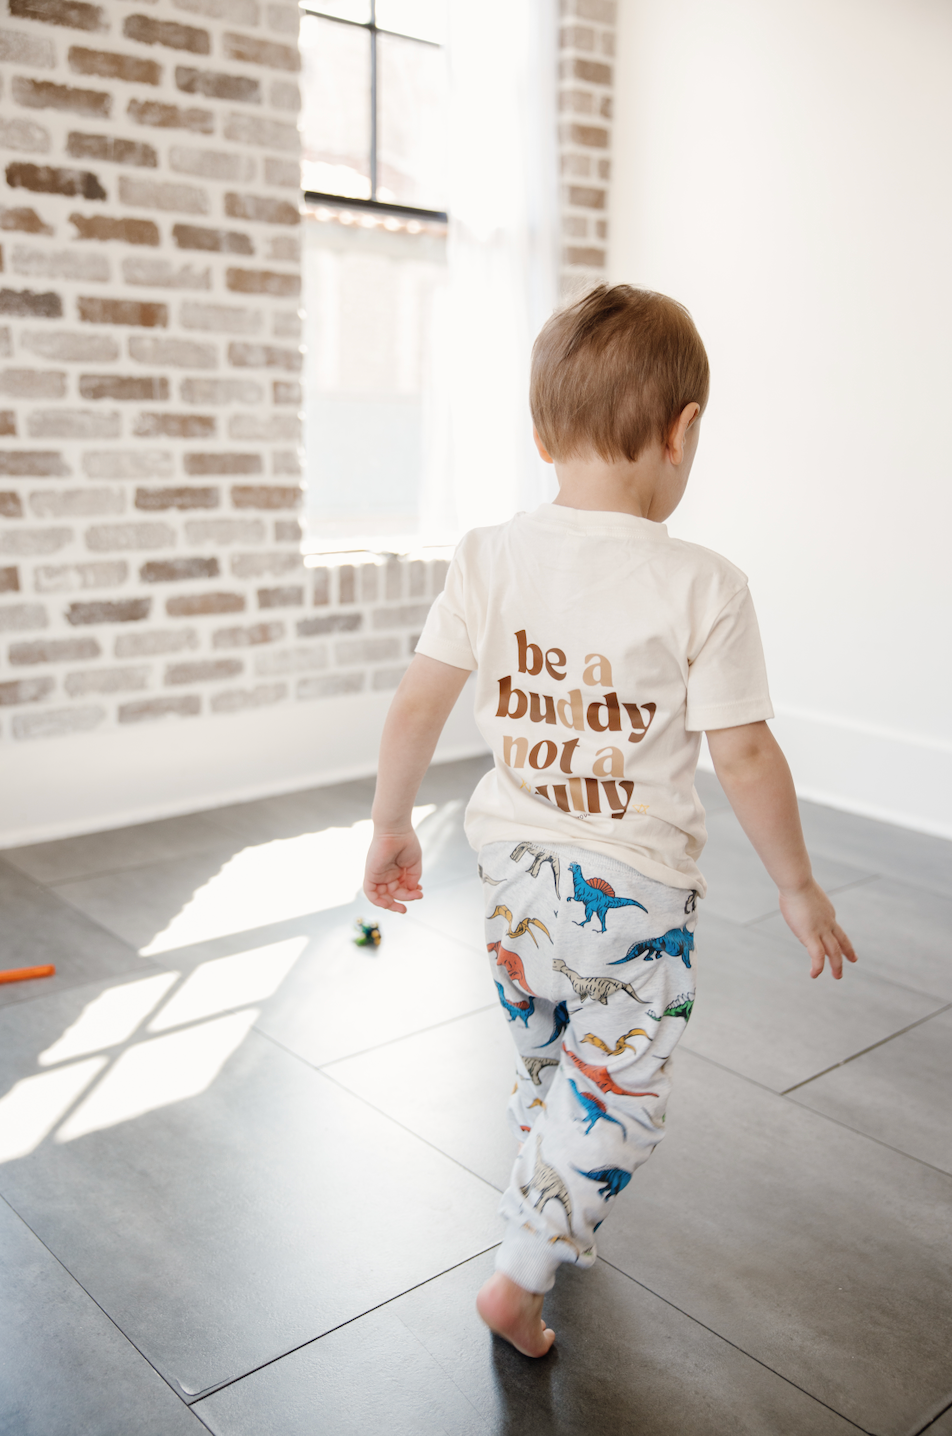 Be a buddy not a bully - Child & infant t-shirt